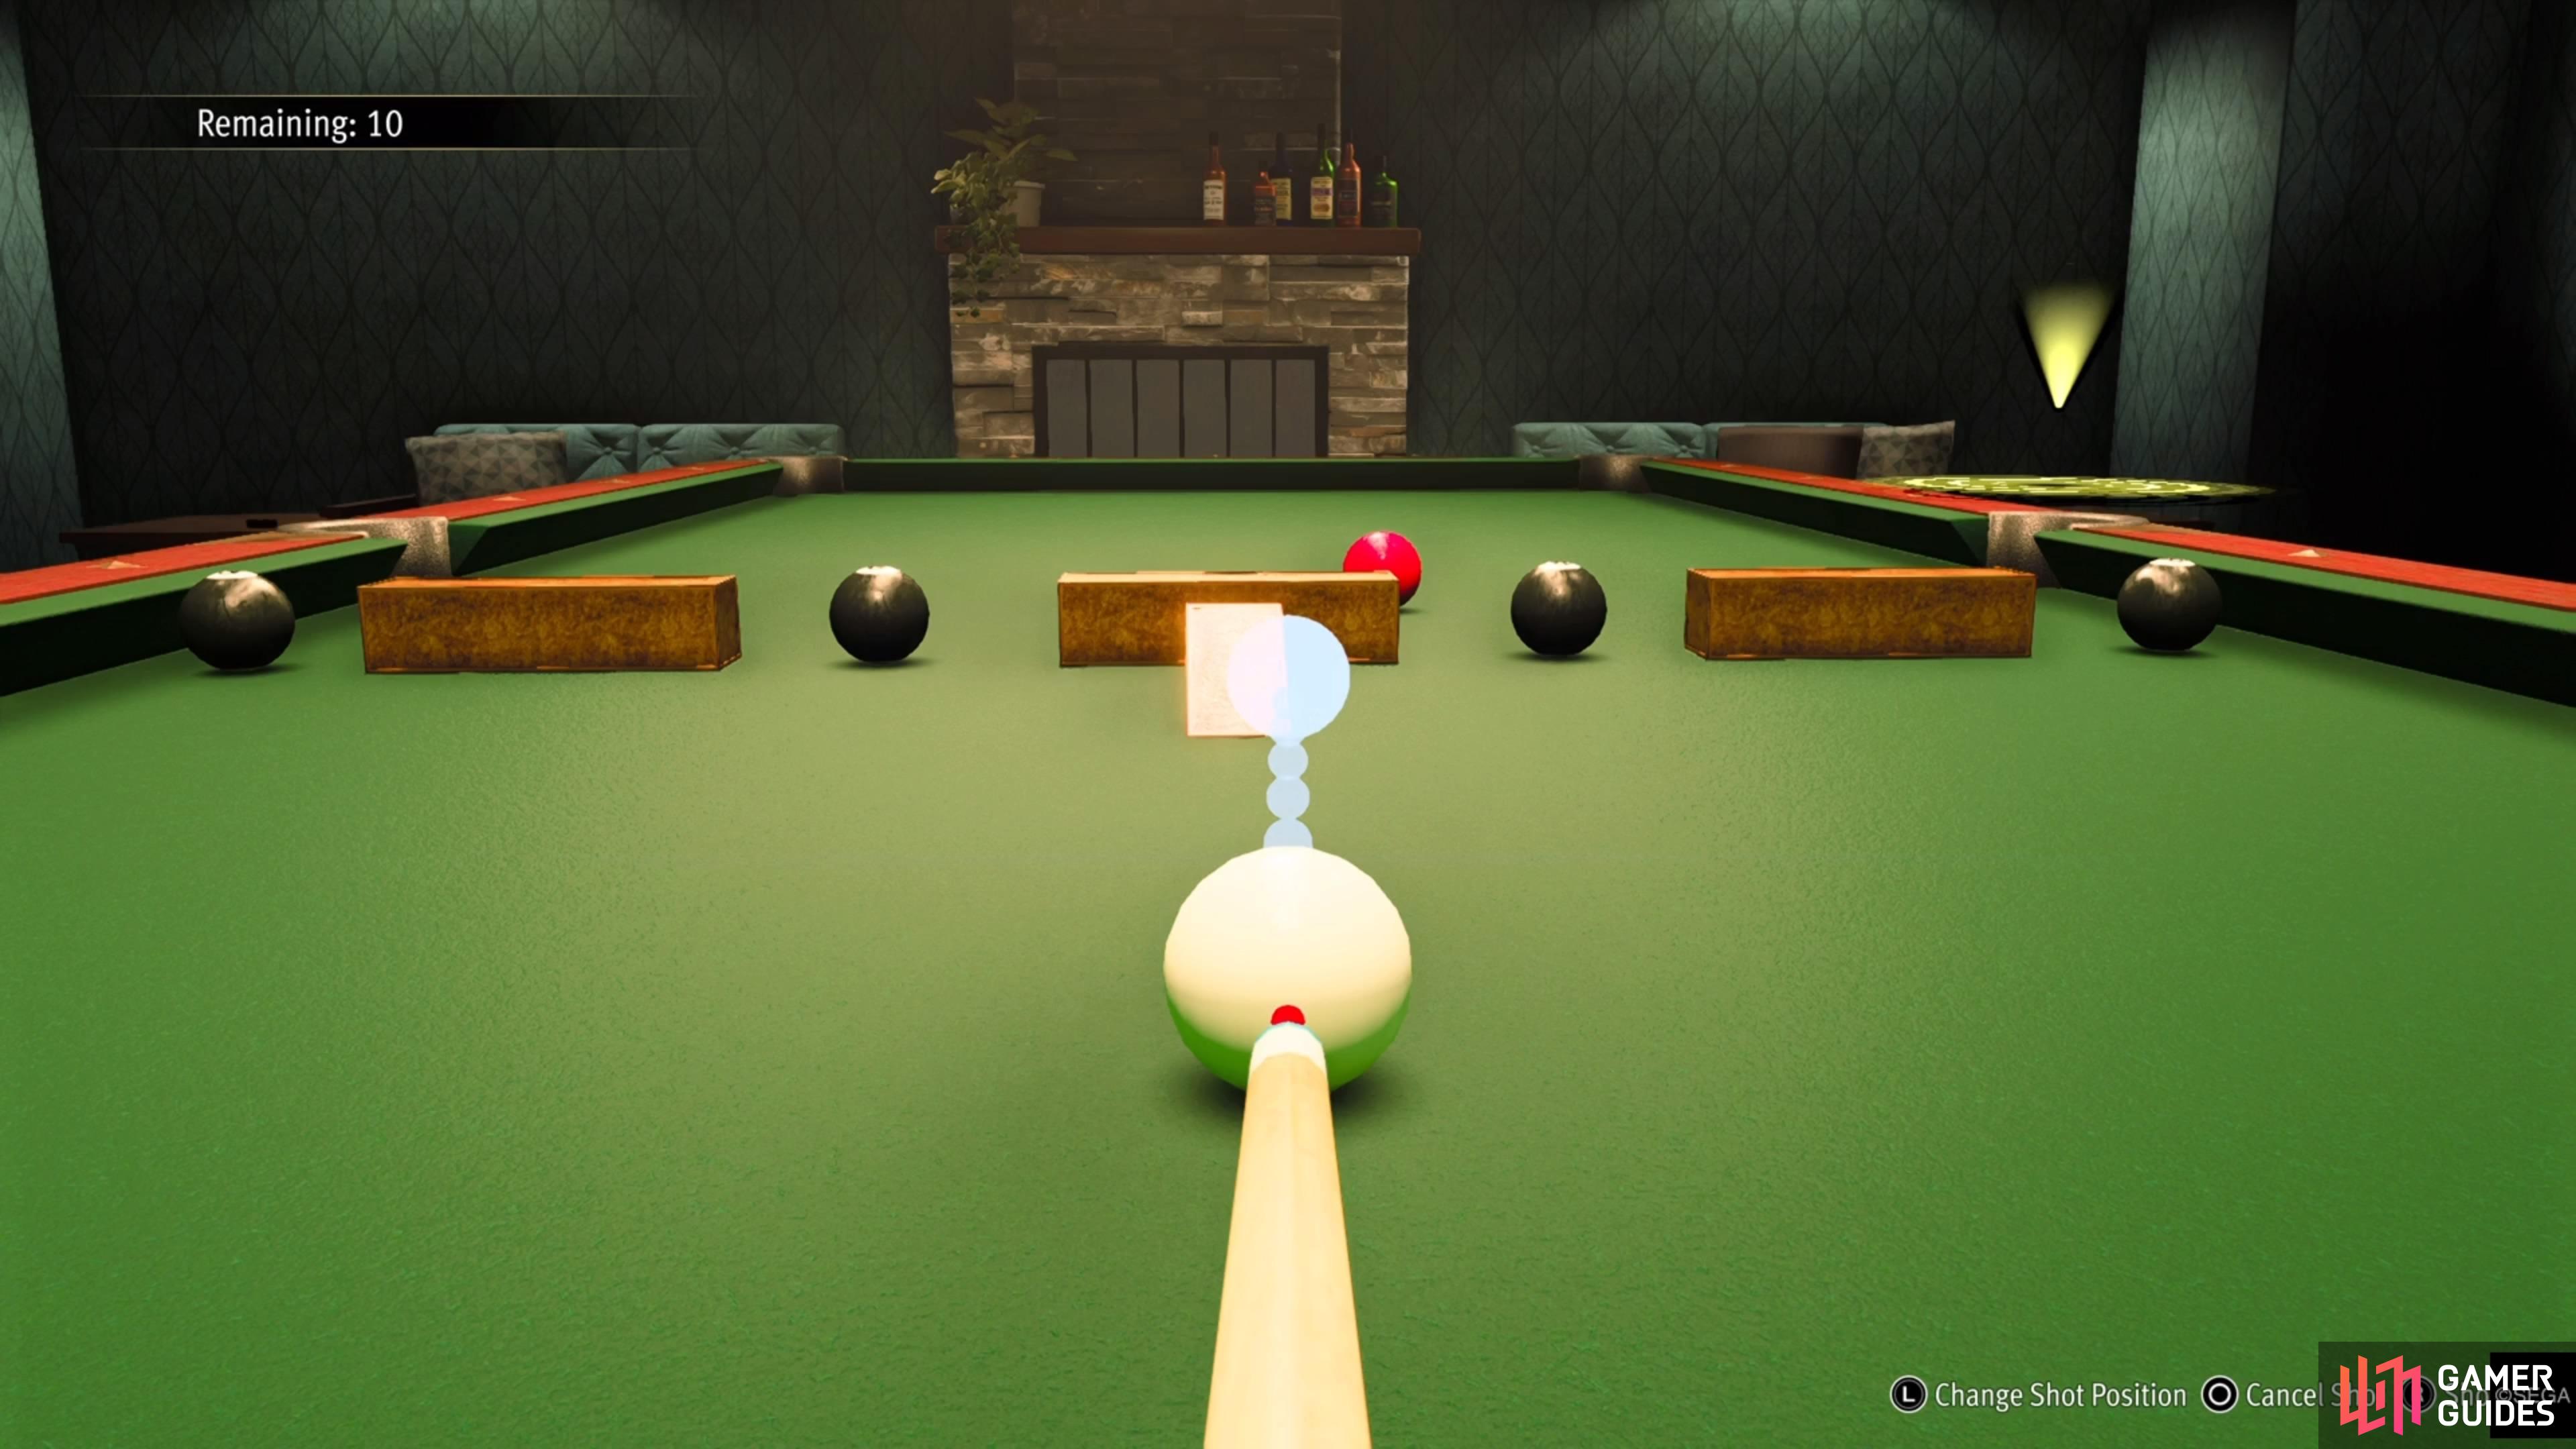 It's a bit finicky, but this is where you should be aiming the cue ball.